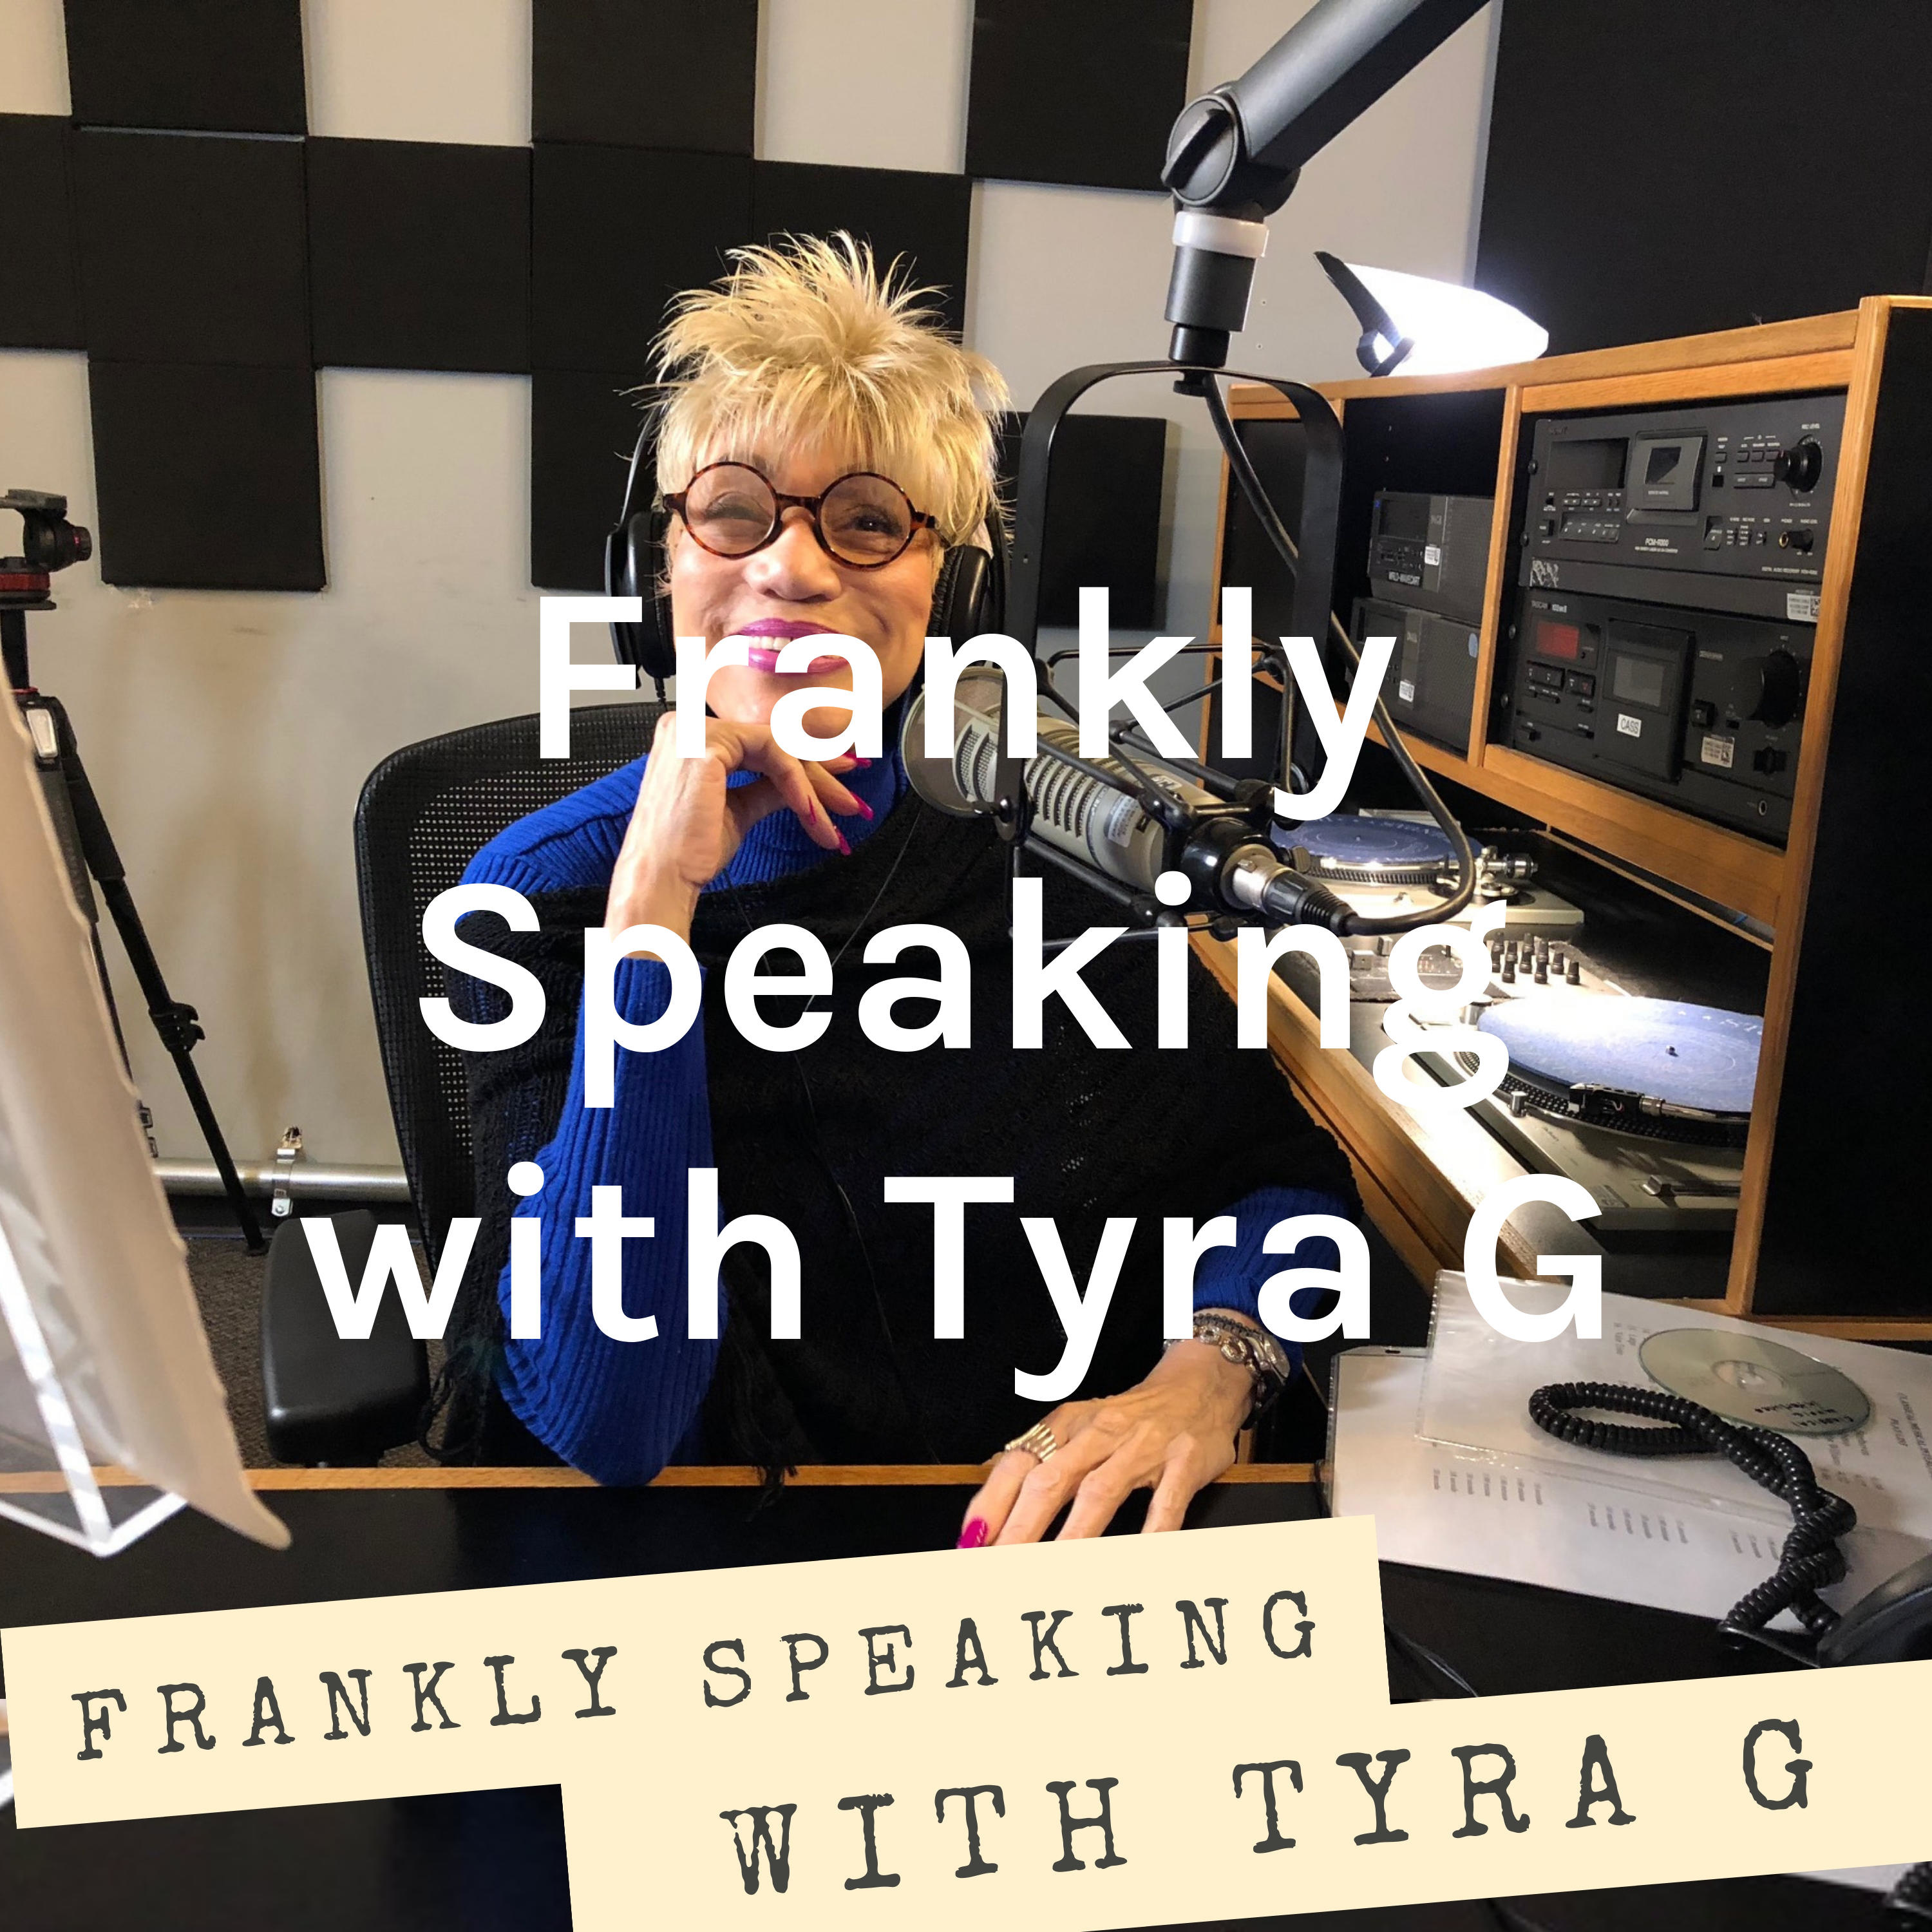 Frankly Speaking with Tyra G